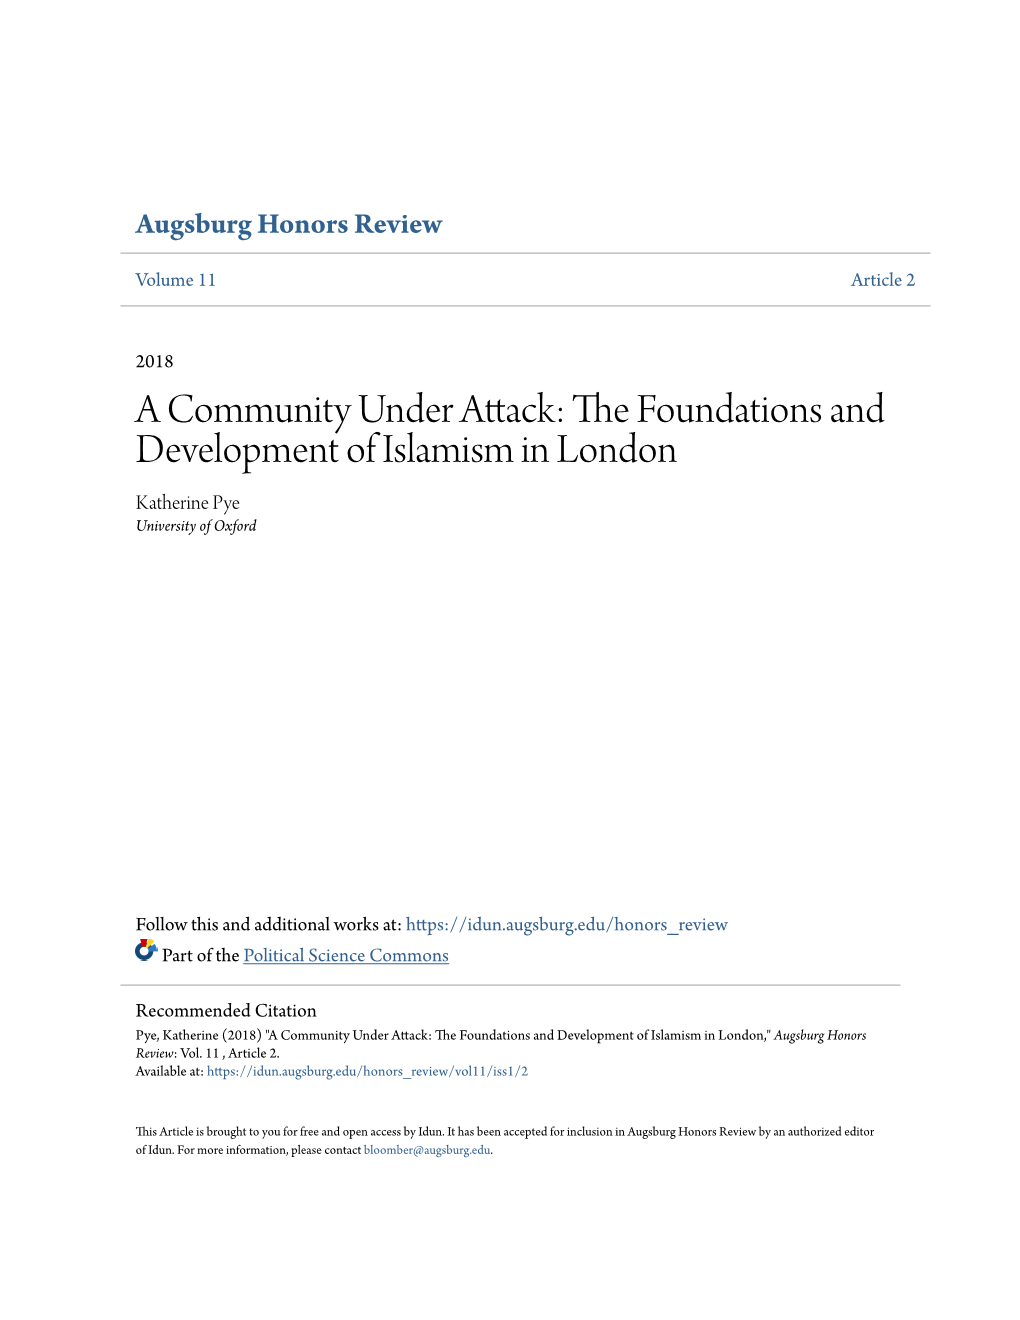 The Foundations and Development of Islamism in London Katherine Pye Laidlaw Scholar, University of Oxford